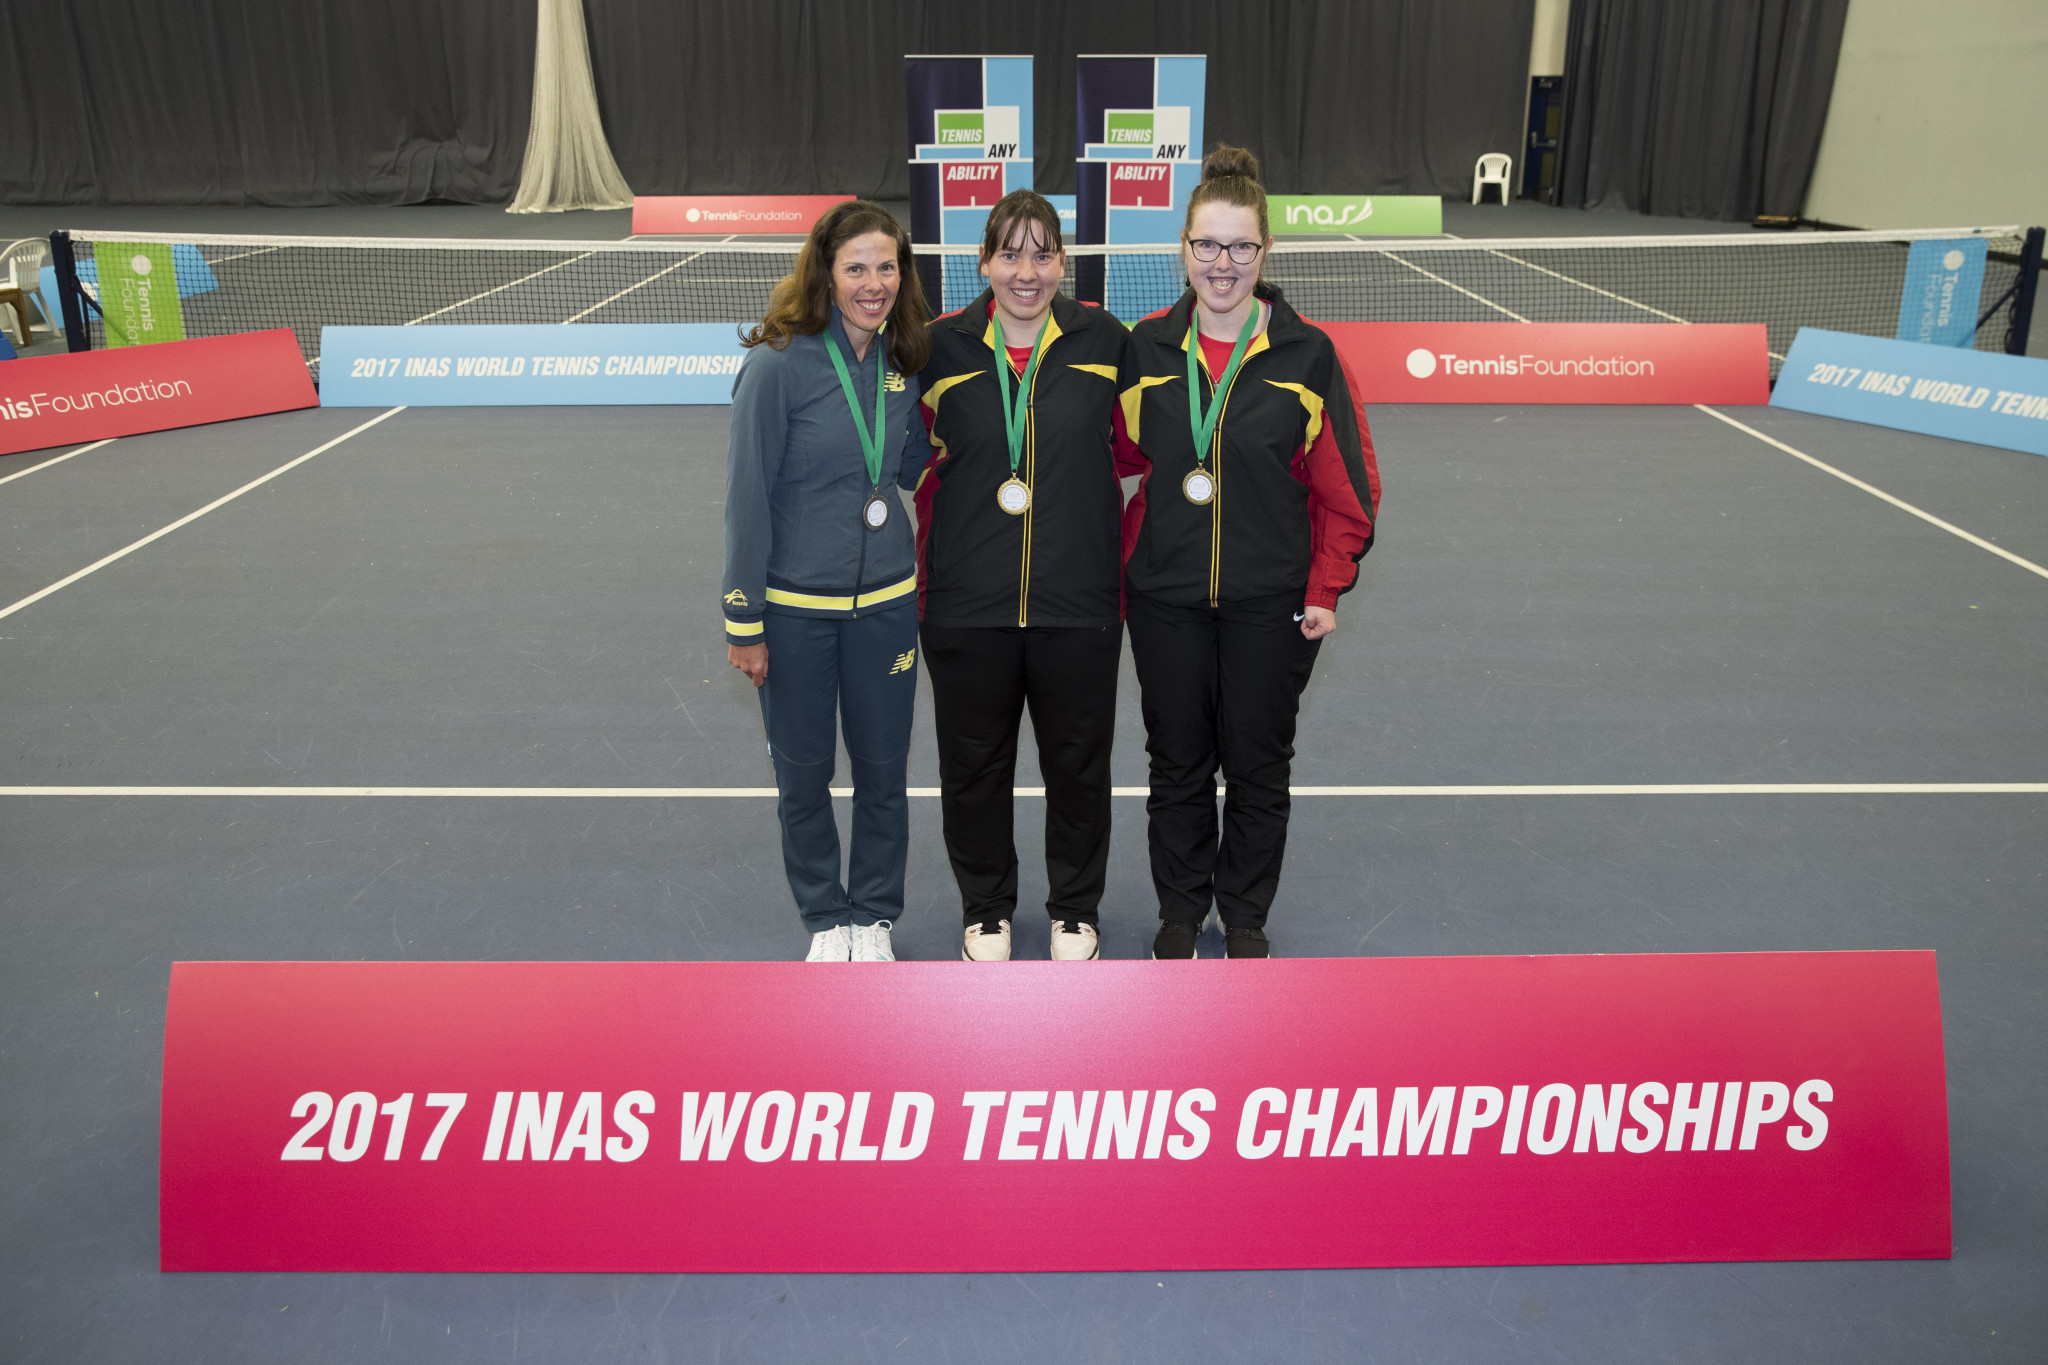 Medal winners from the previously named INAS World Tennis Championships ©Virtus